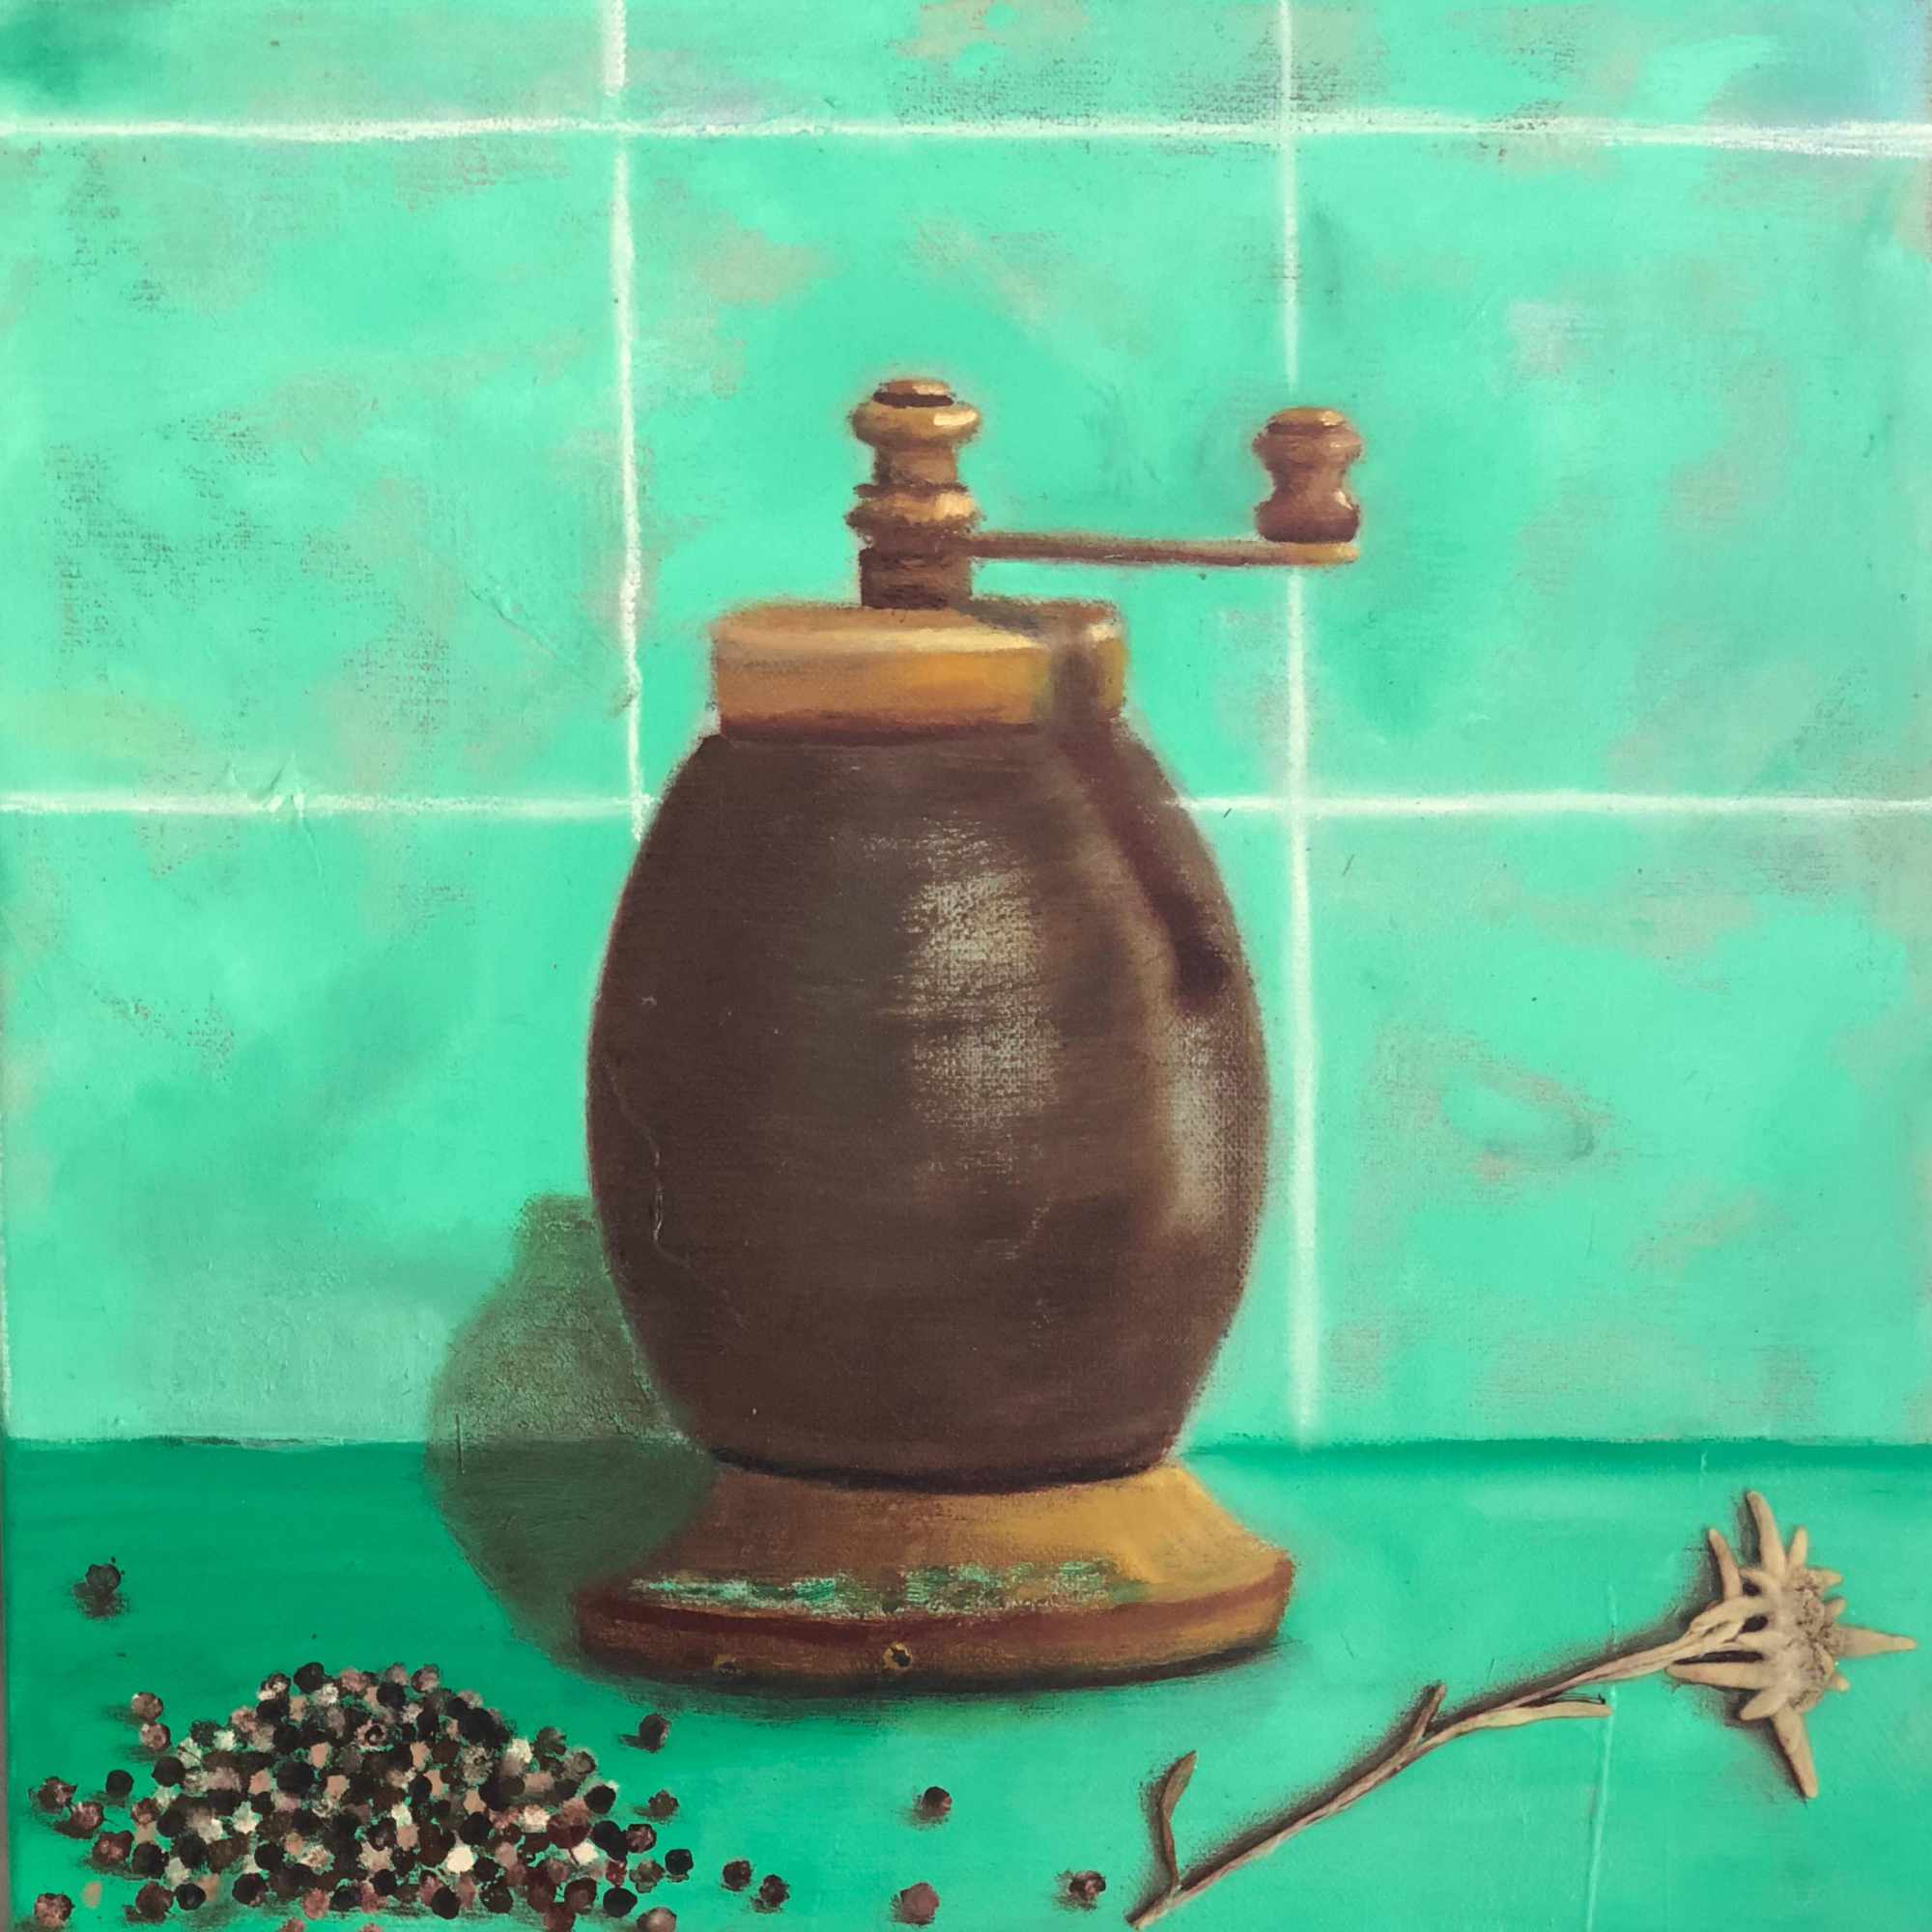 Nonnas Pepper Grinder - Oil on Canvas - 300 x 300mm - SOLD